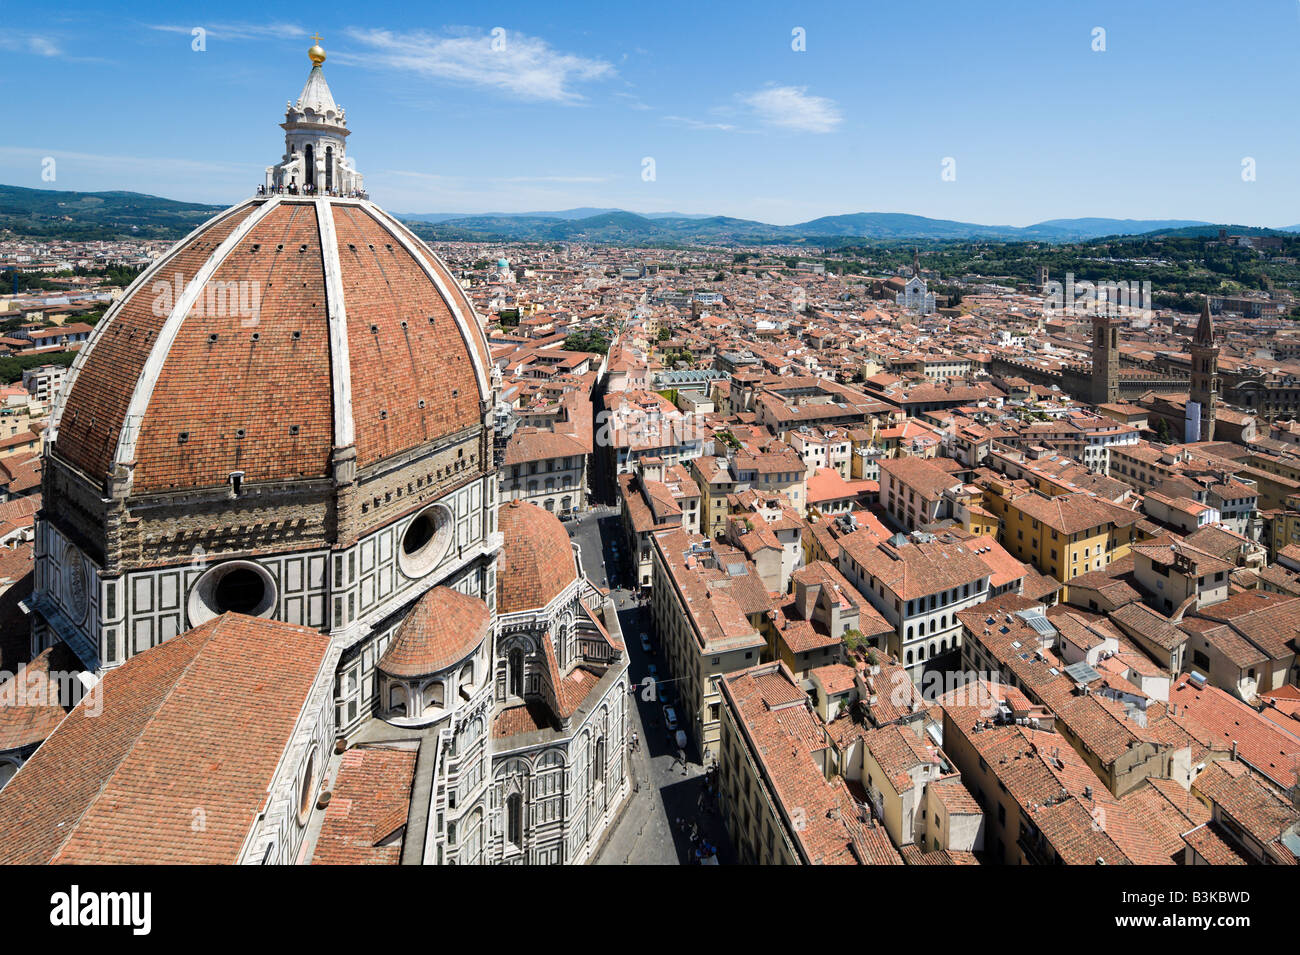 View of the Dome of the Basilica di Santa Maria del Fiore (the Duomo), from the Campanile, Florence, Tuscany, Italy Stock Photo